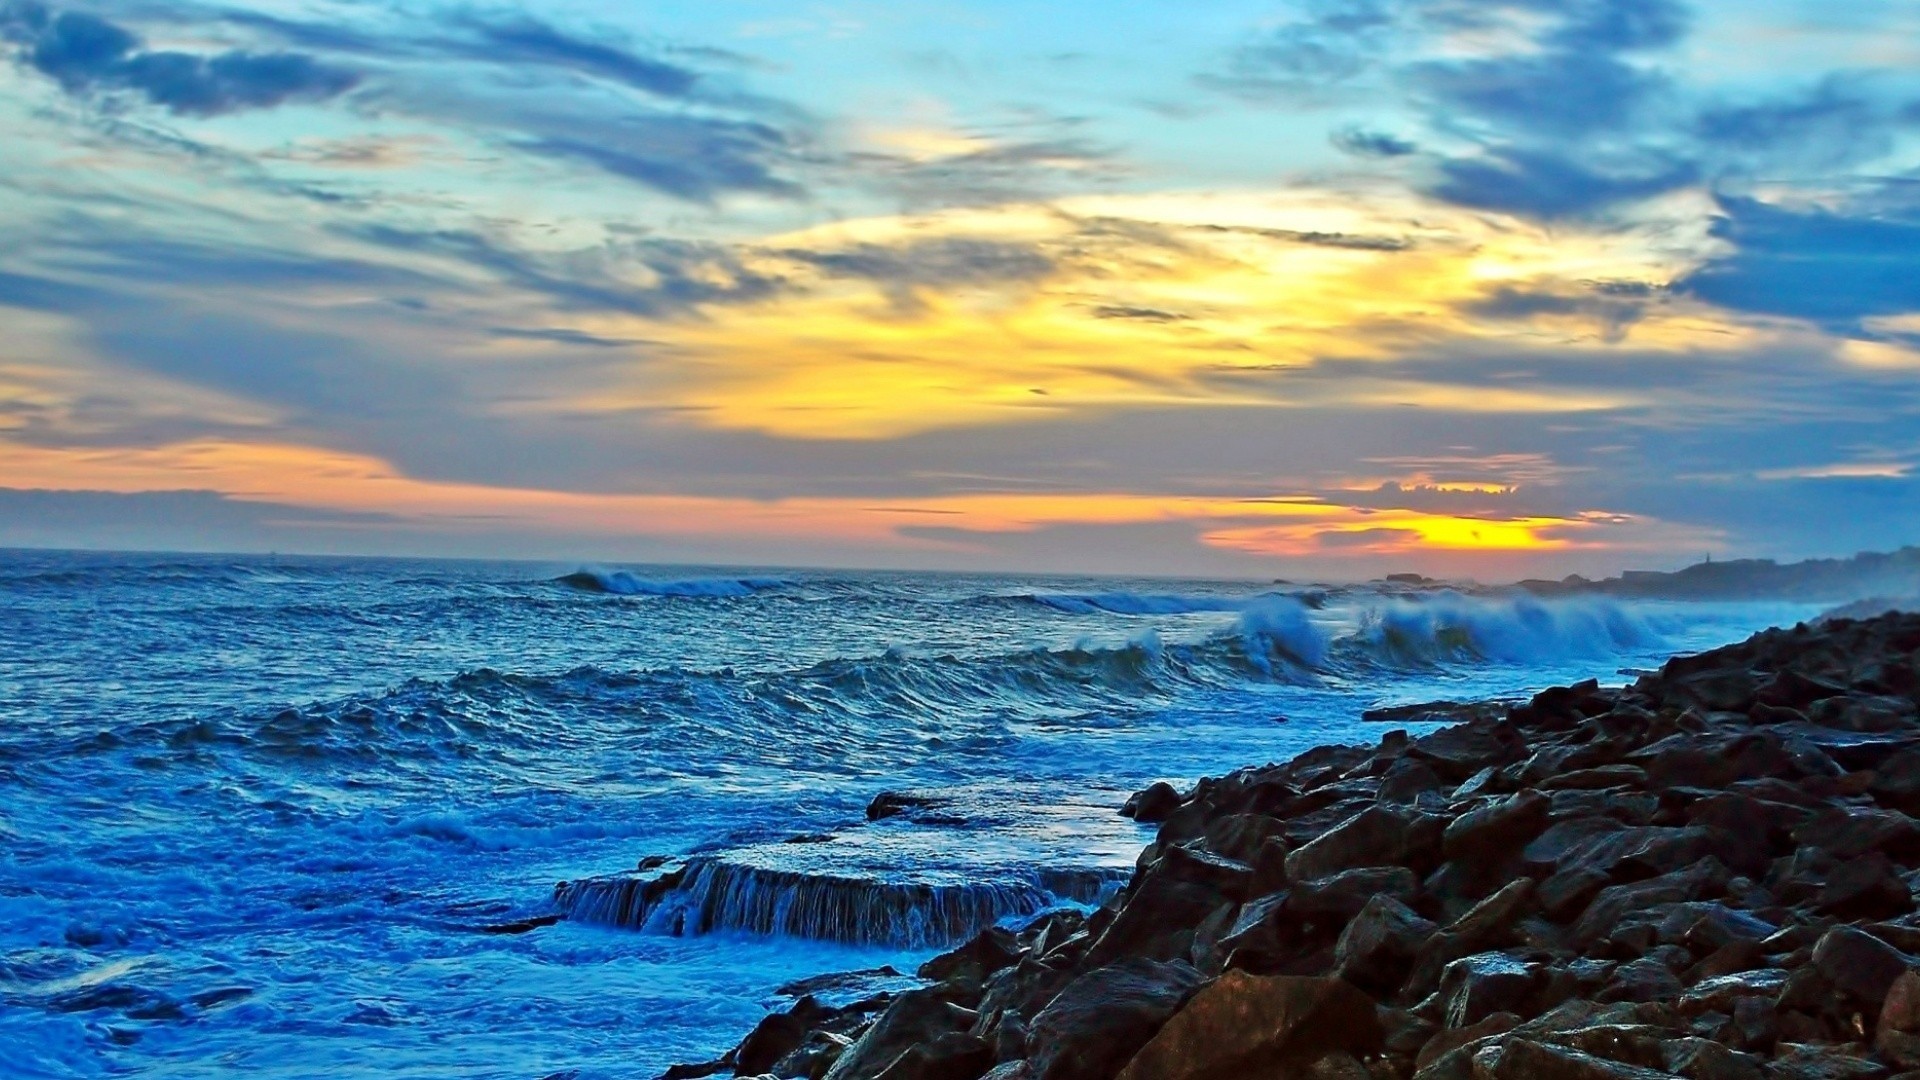 Angry Sea Rocky Coast Sunset Clouds Waves Surf Rocks Nature Paradise India Beach Iphone 6 Wallpaper Tumblr Detail